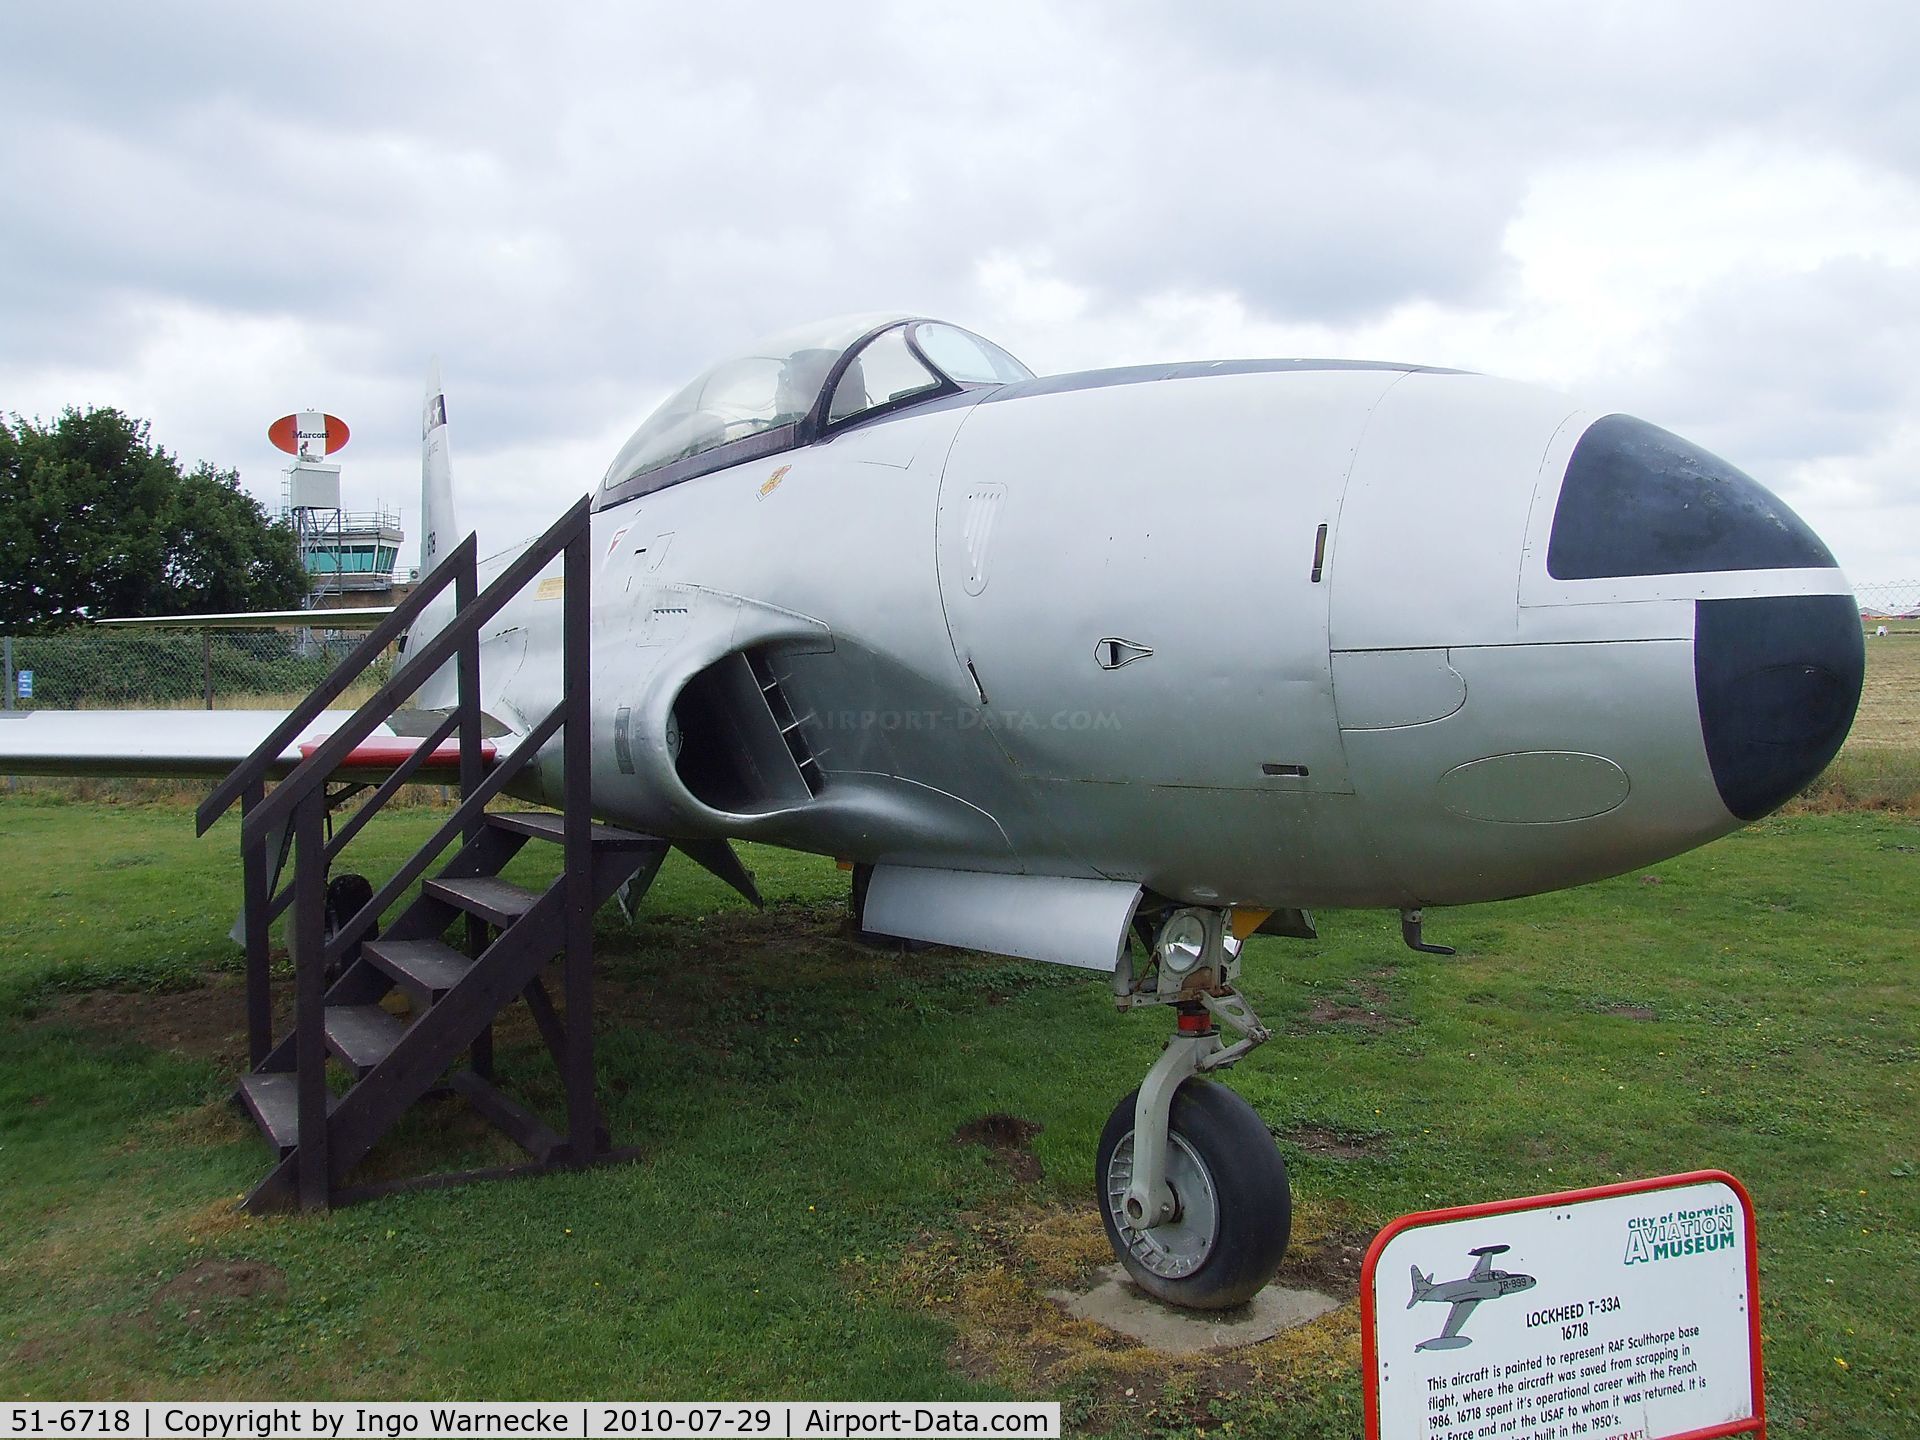 51-6718, 1951 Lockheed T-33A Shooting Star C/N 580-6050, Lockheed T-33A at the City of Norwich Aviation Museum